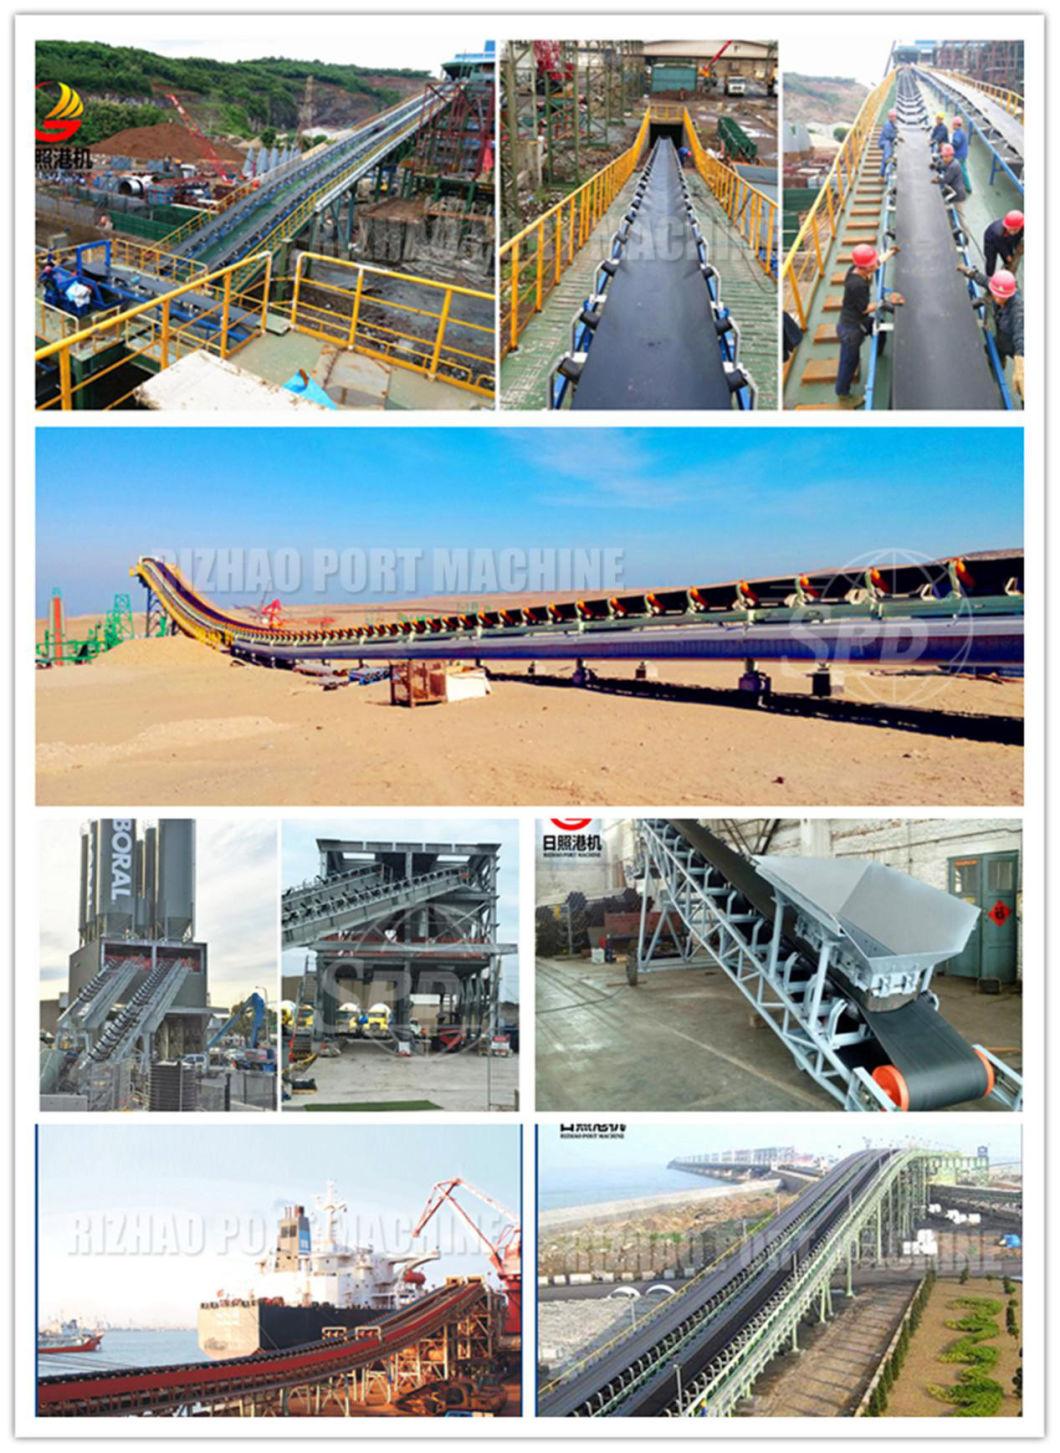 Manufacture Supply Directly Belt Conveyor Cover Rain Covers